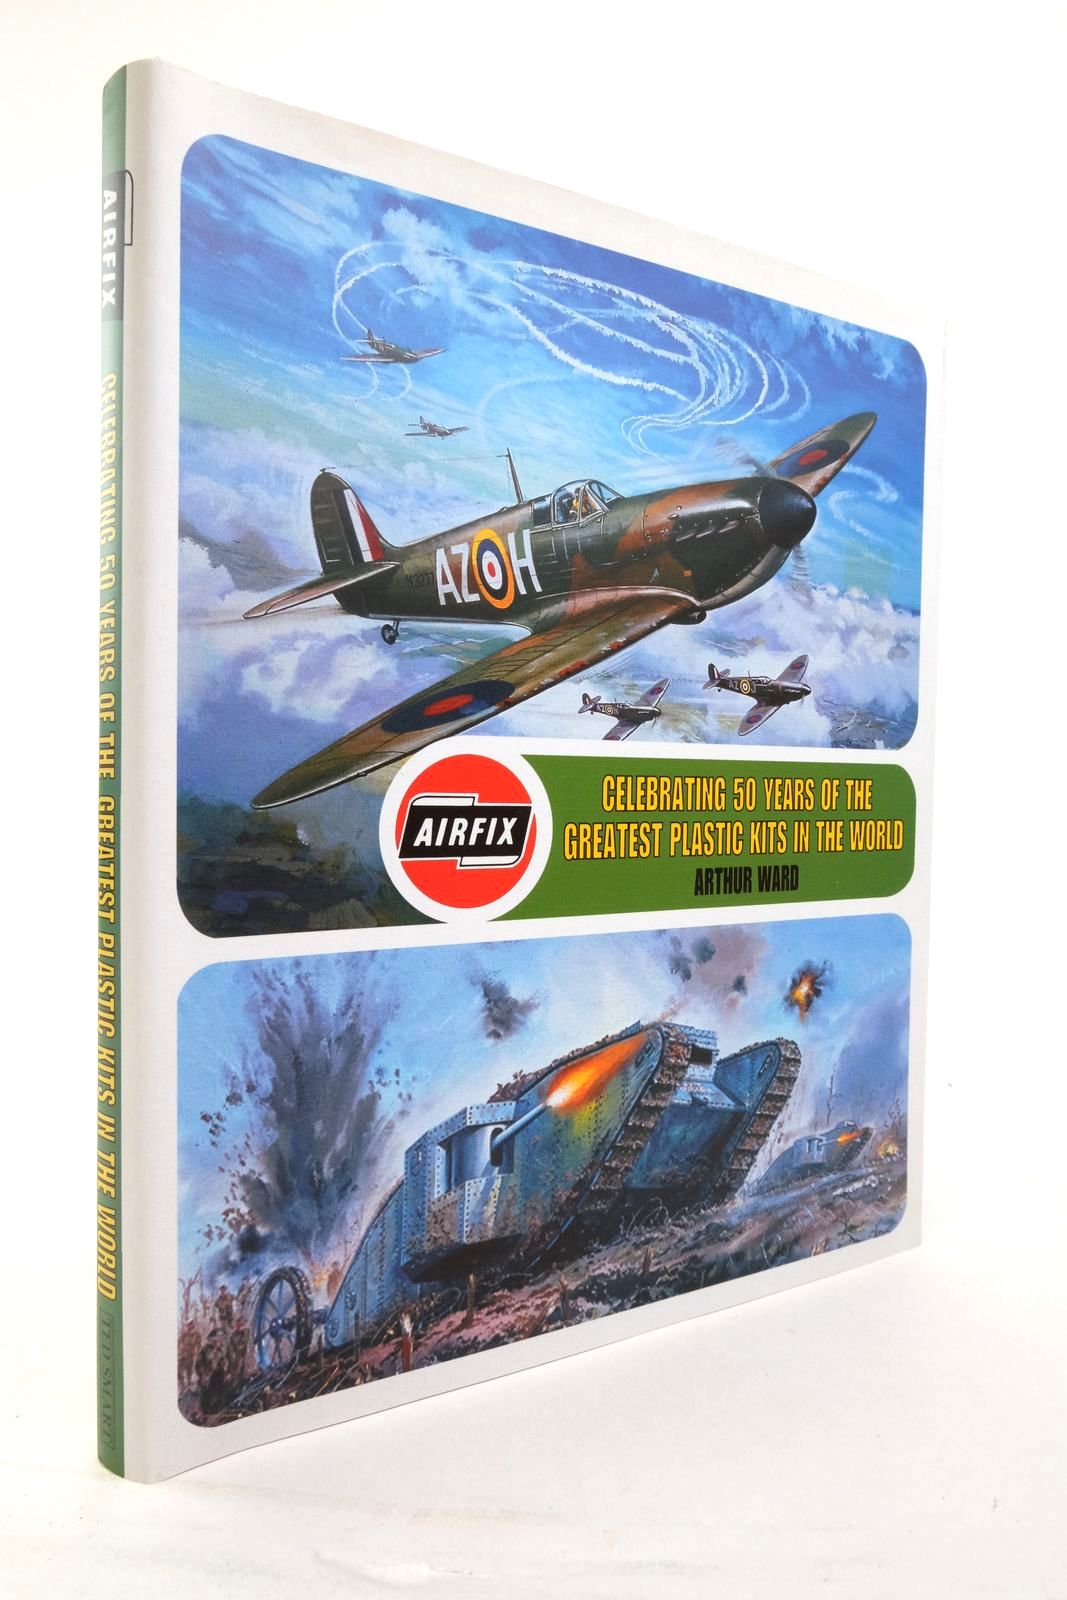 Photo of AIRFIX: CELEBRATING 50 YEARS OF THE WORLD'S GREATEST PLASTIC KITS written by Ward, Arthur published by Ted Smart (STOCK CODE: 2137702)  for sale by Stella & Rose's Books